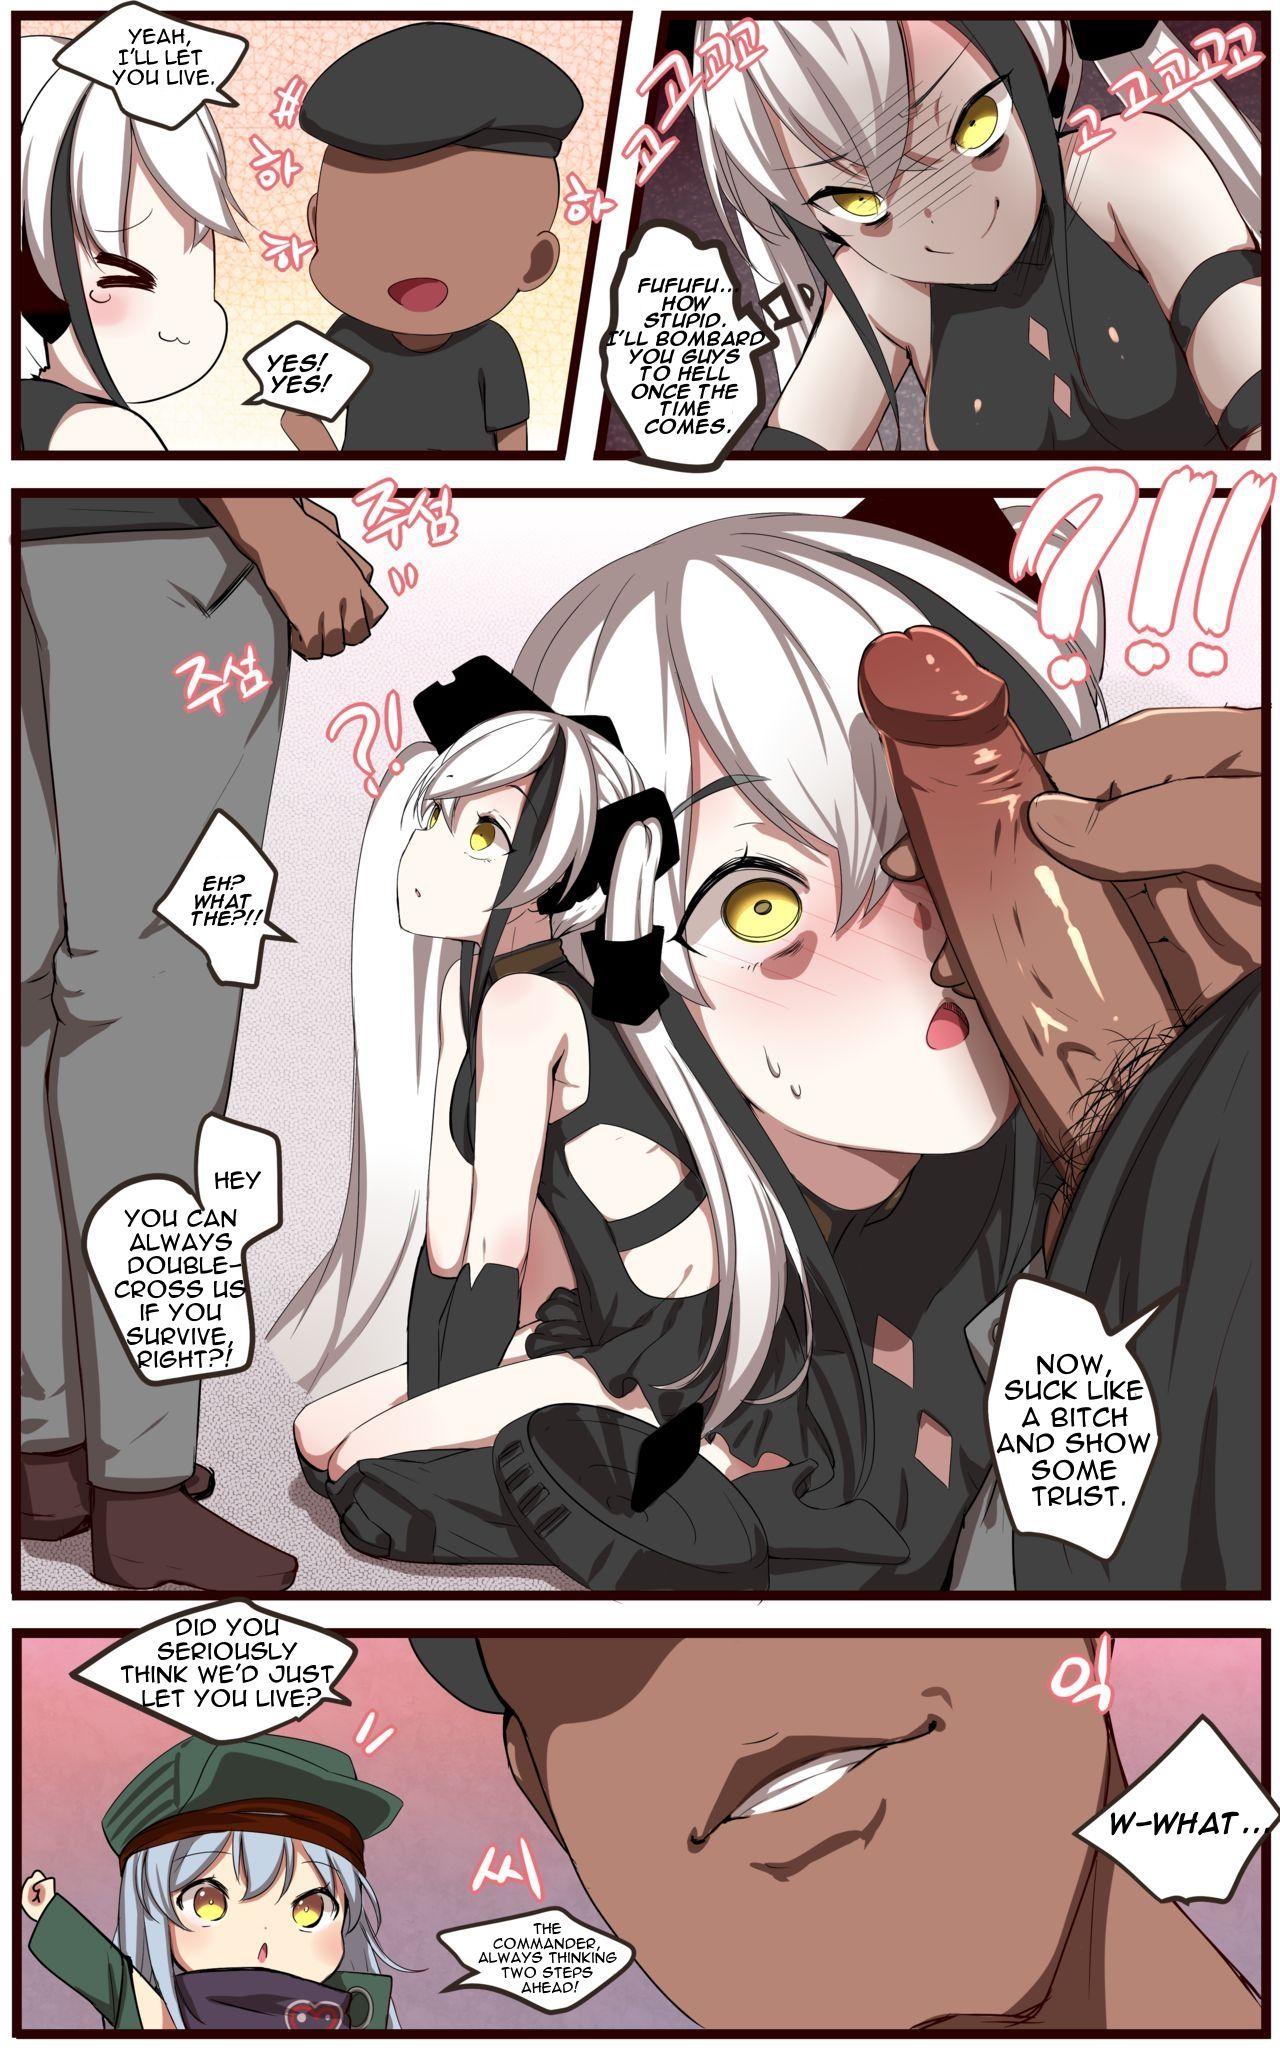 Francais How to use dolls 06 - Girls frontline Amiga - Page 4